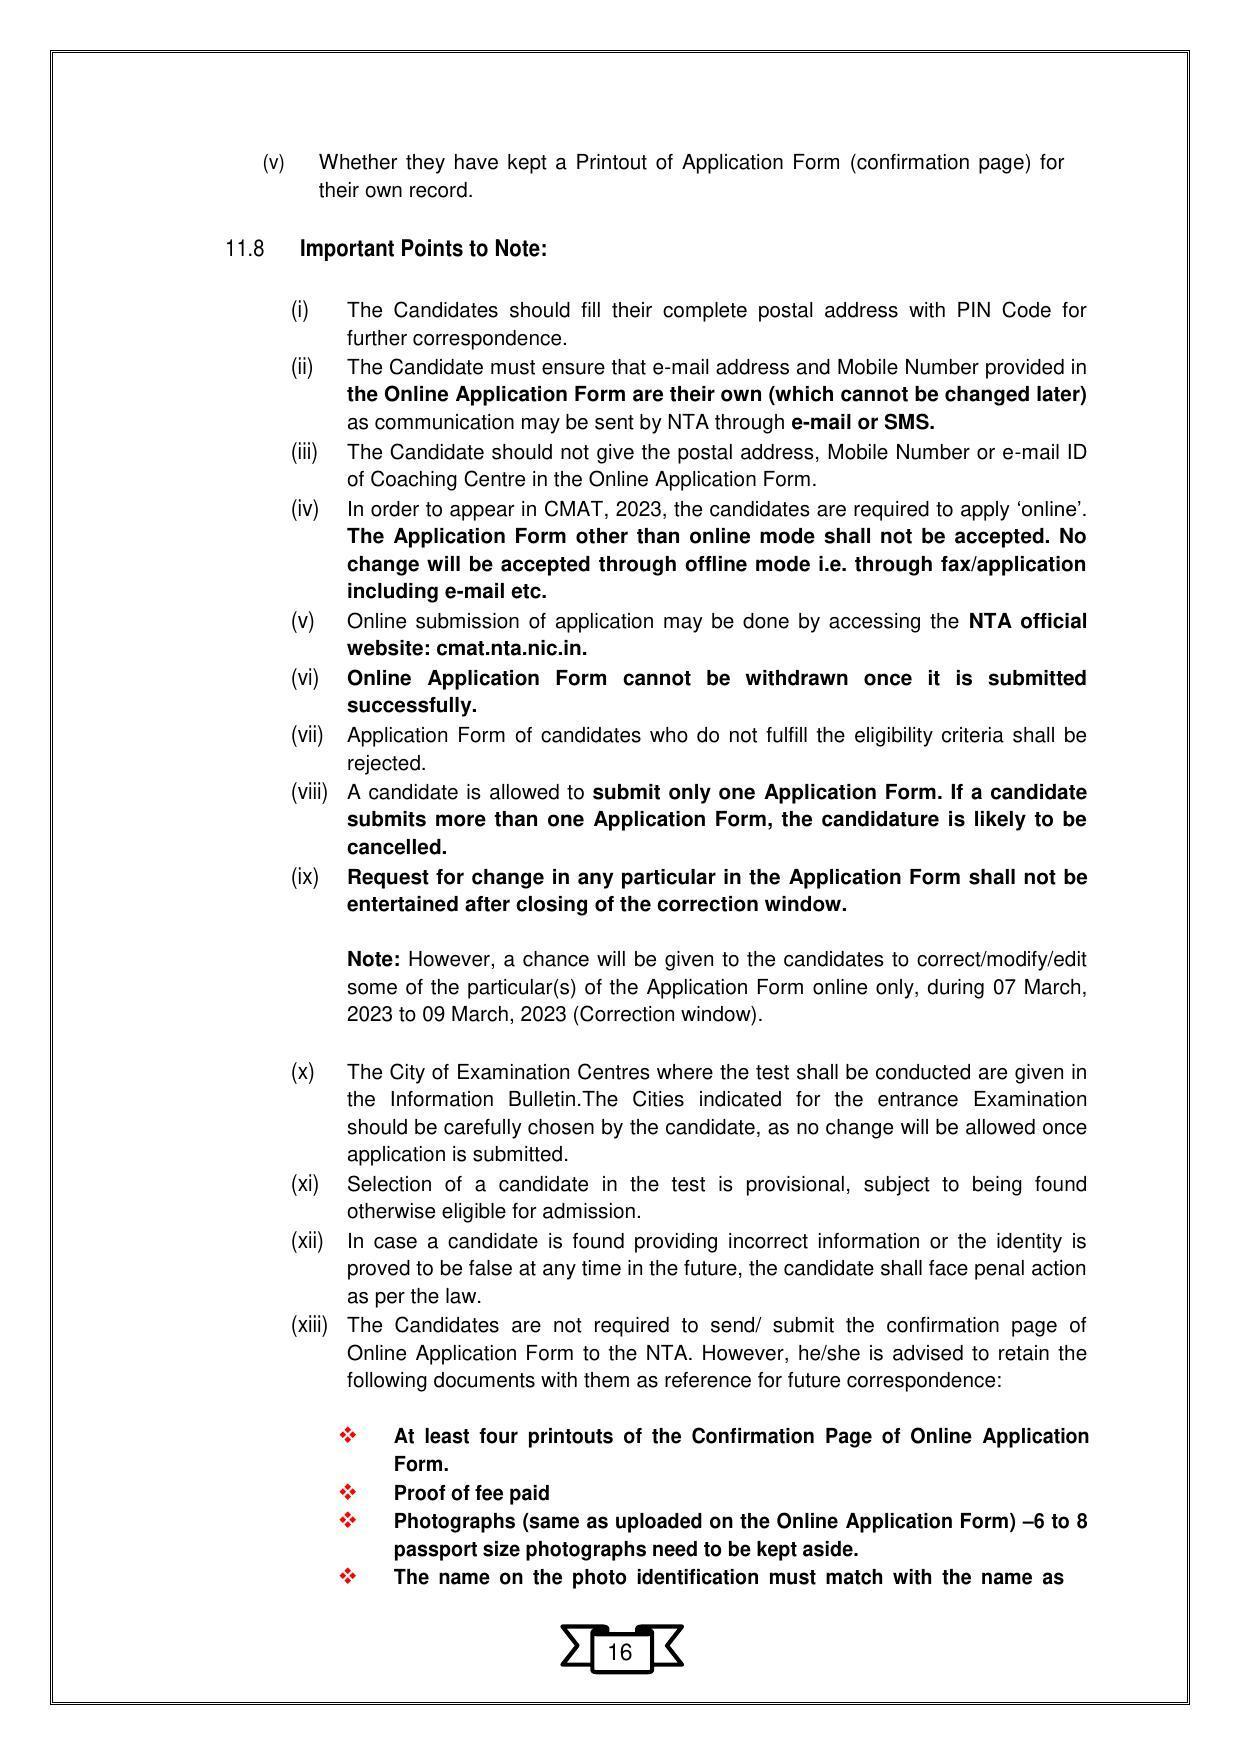 CMAT 2023 Information Bulletin - Page 19